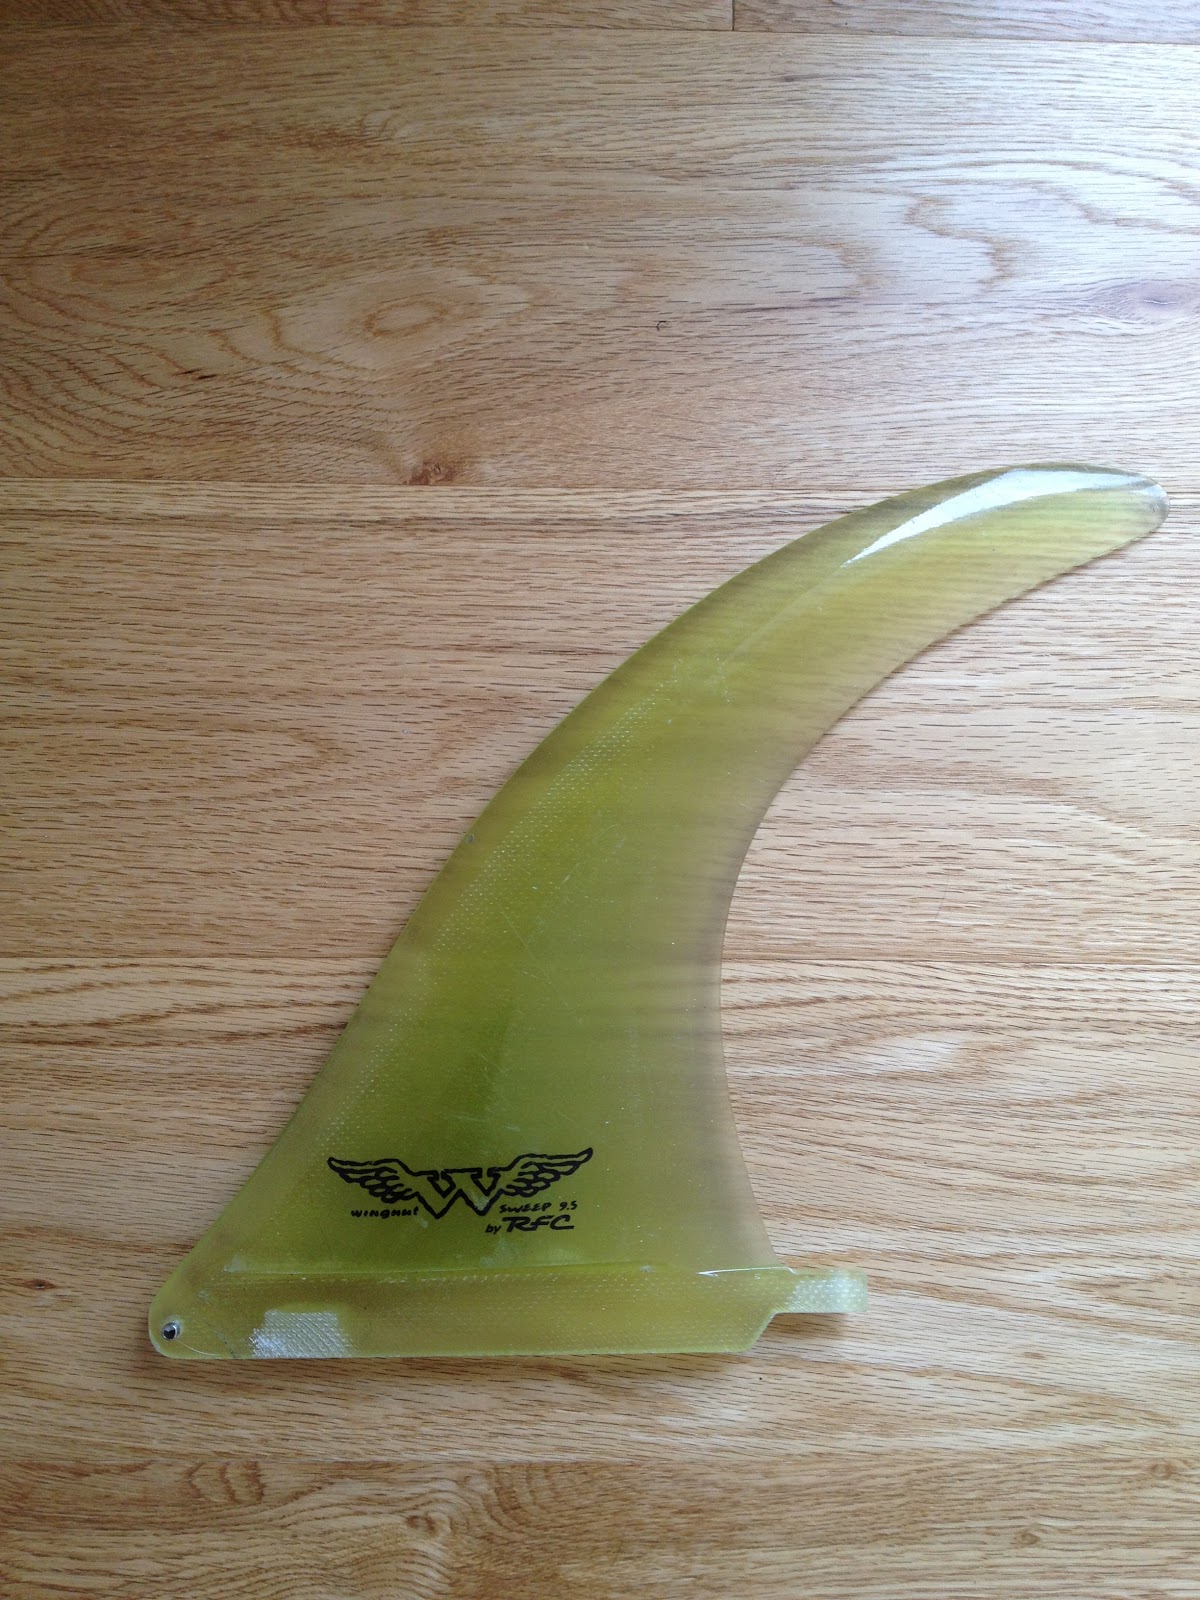 Some longboards for sale: Fins for sale